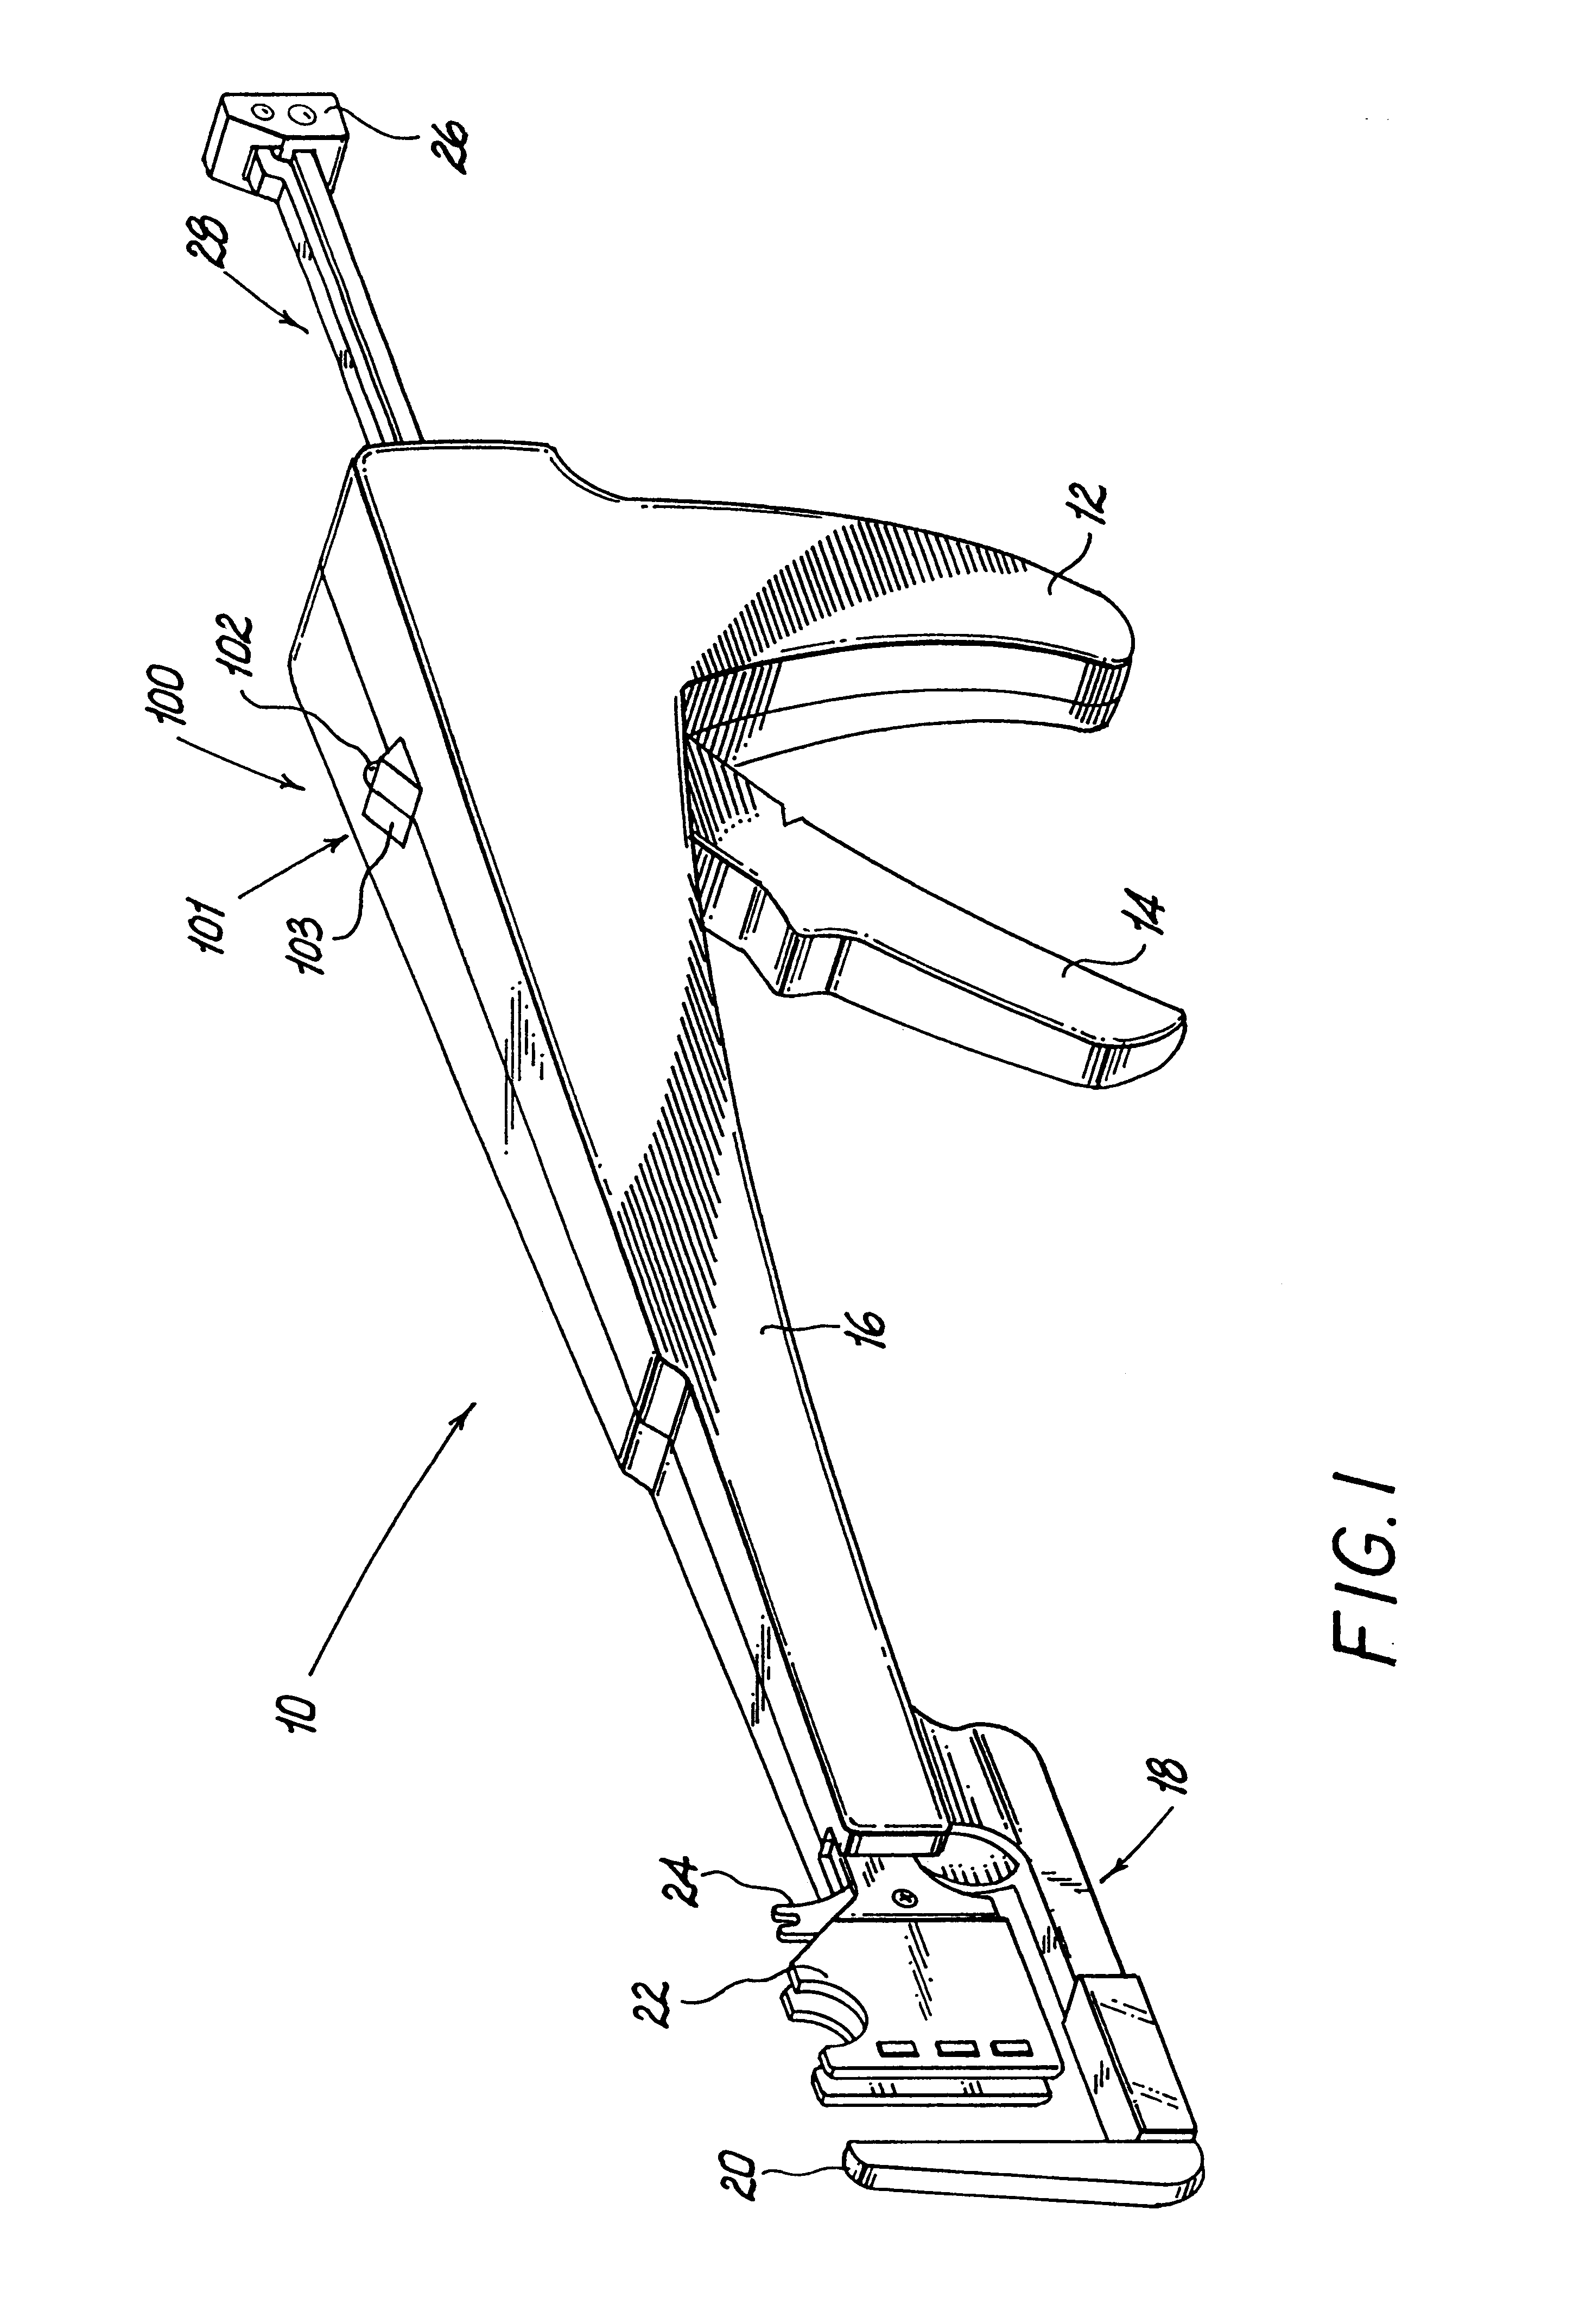 Surgical apparatus with indicator